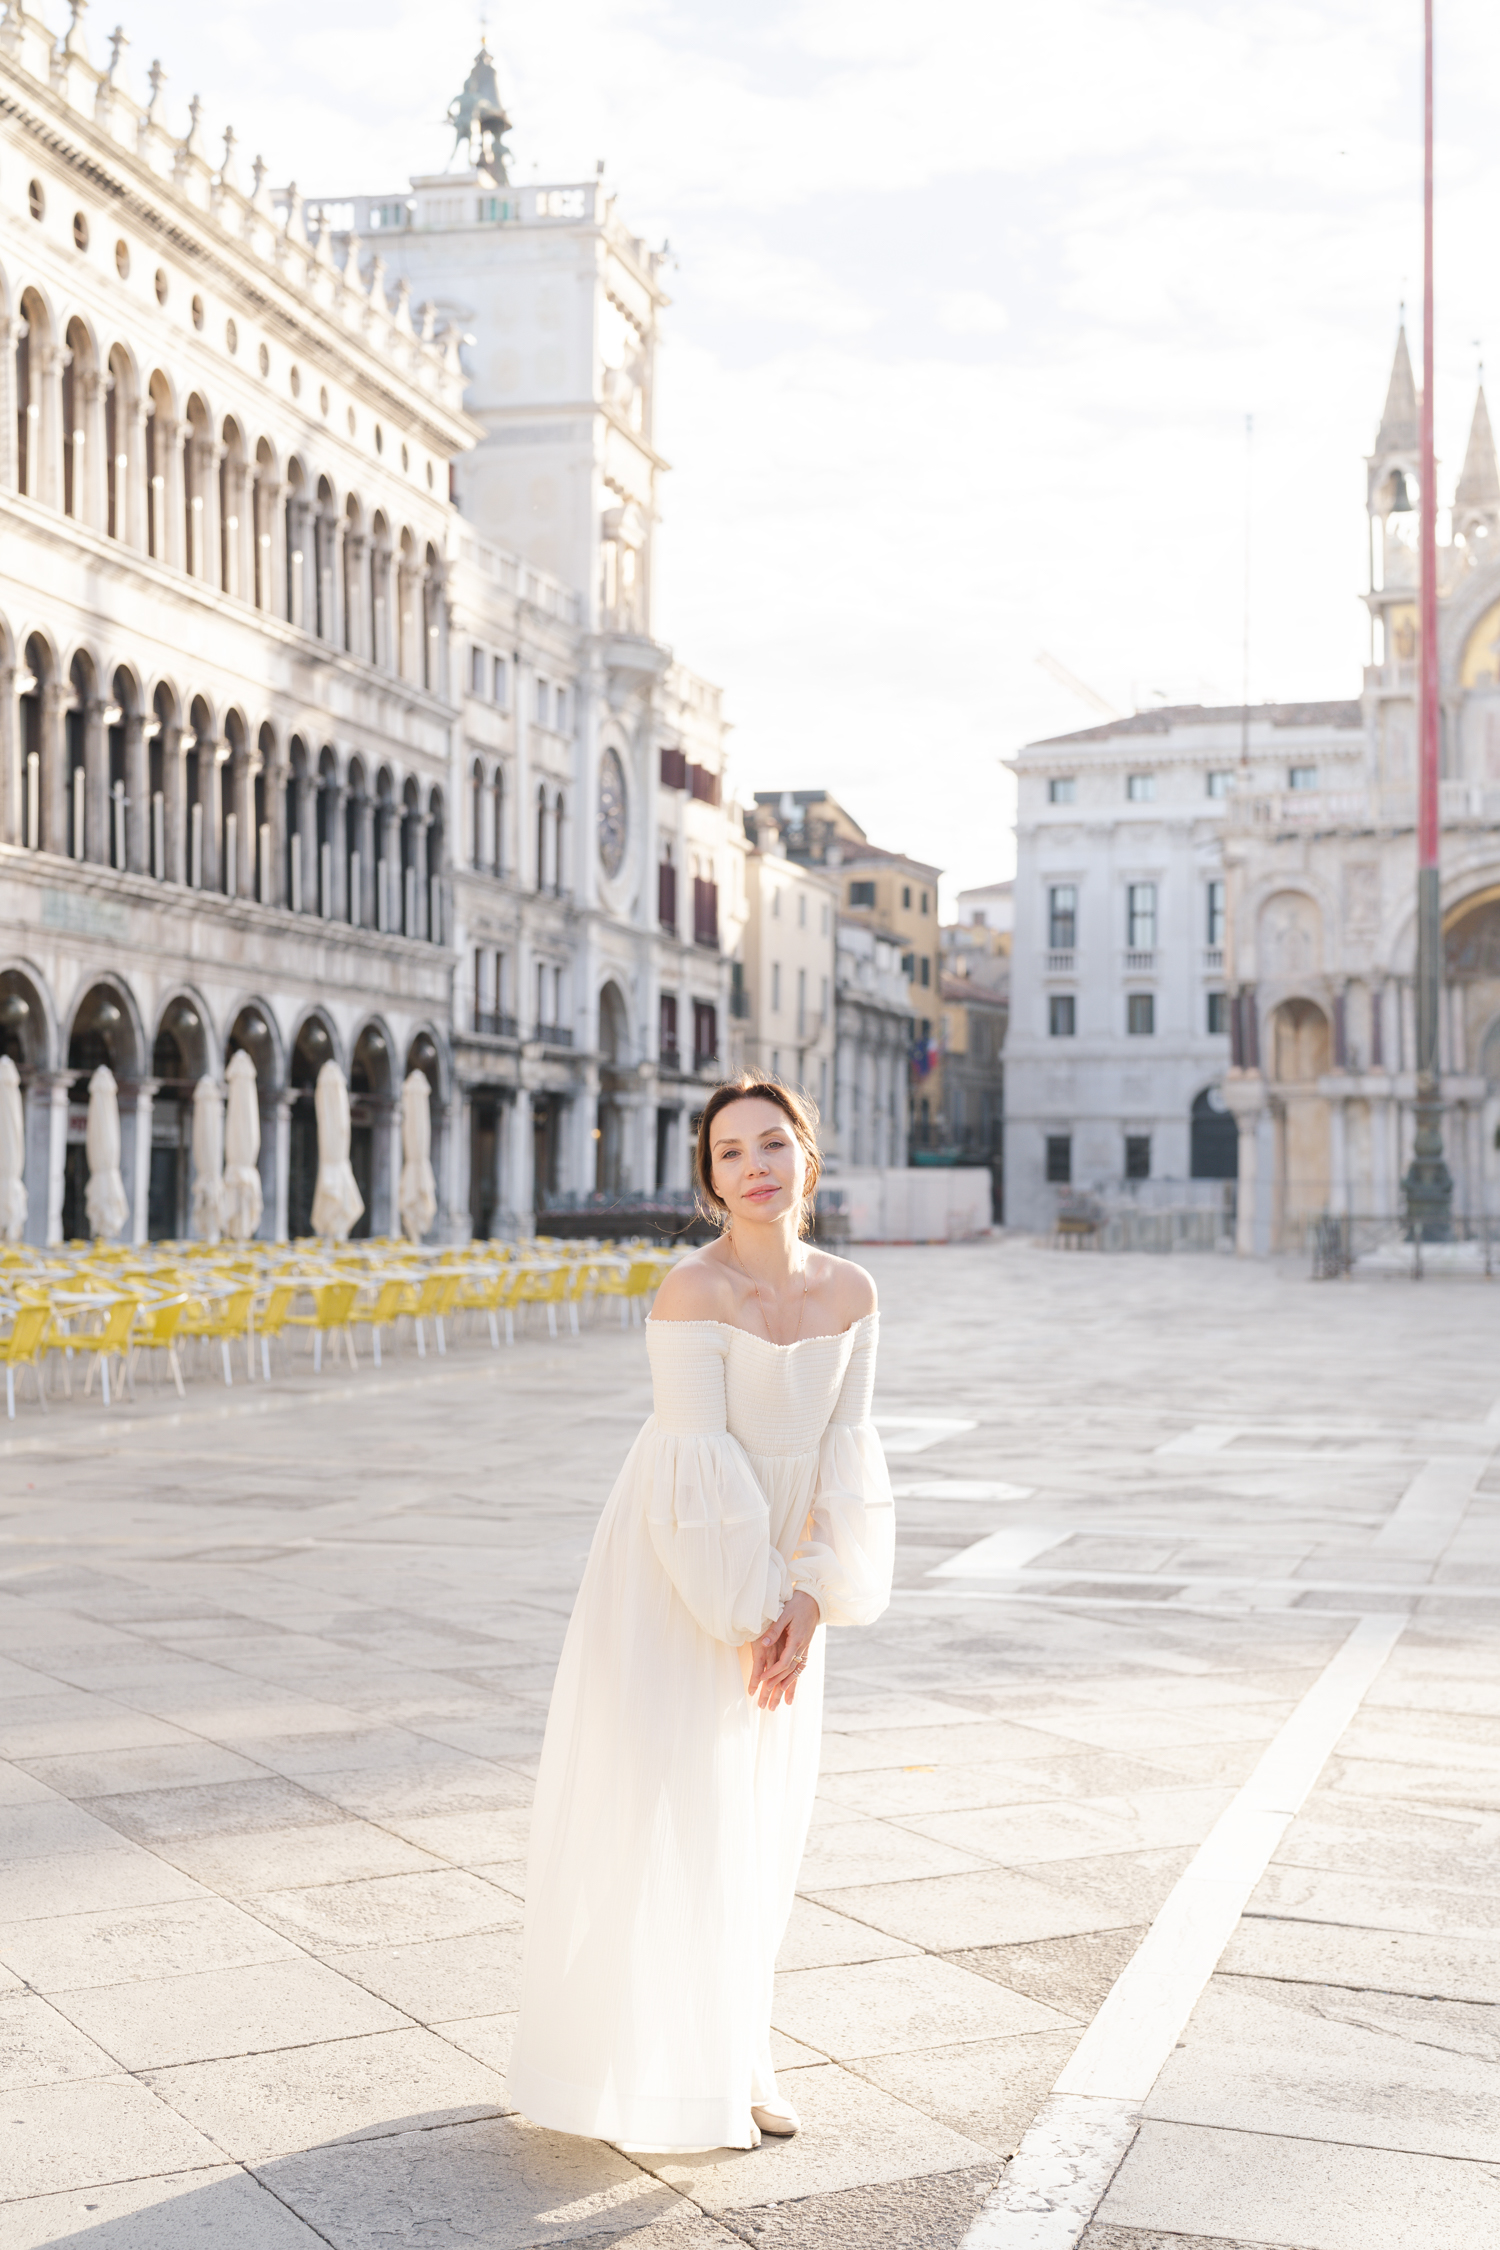 top locations and poses for a sunrise Venice portrait photoshoot with local photographer, Alina Indi